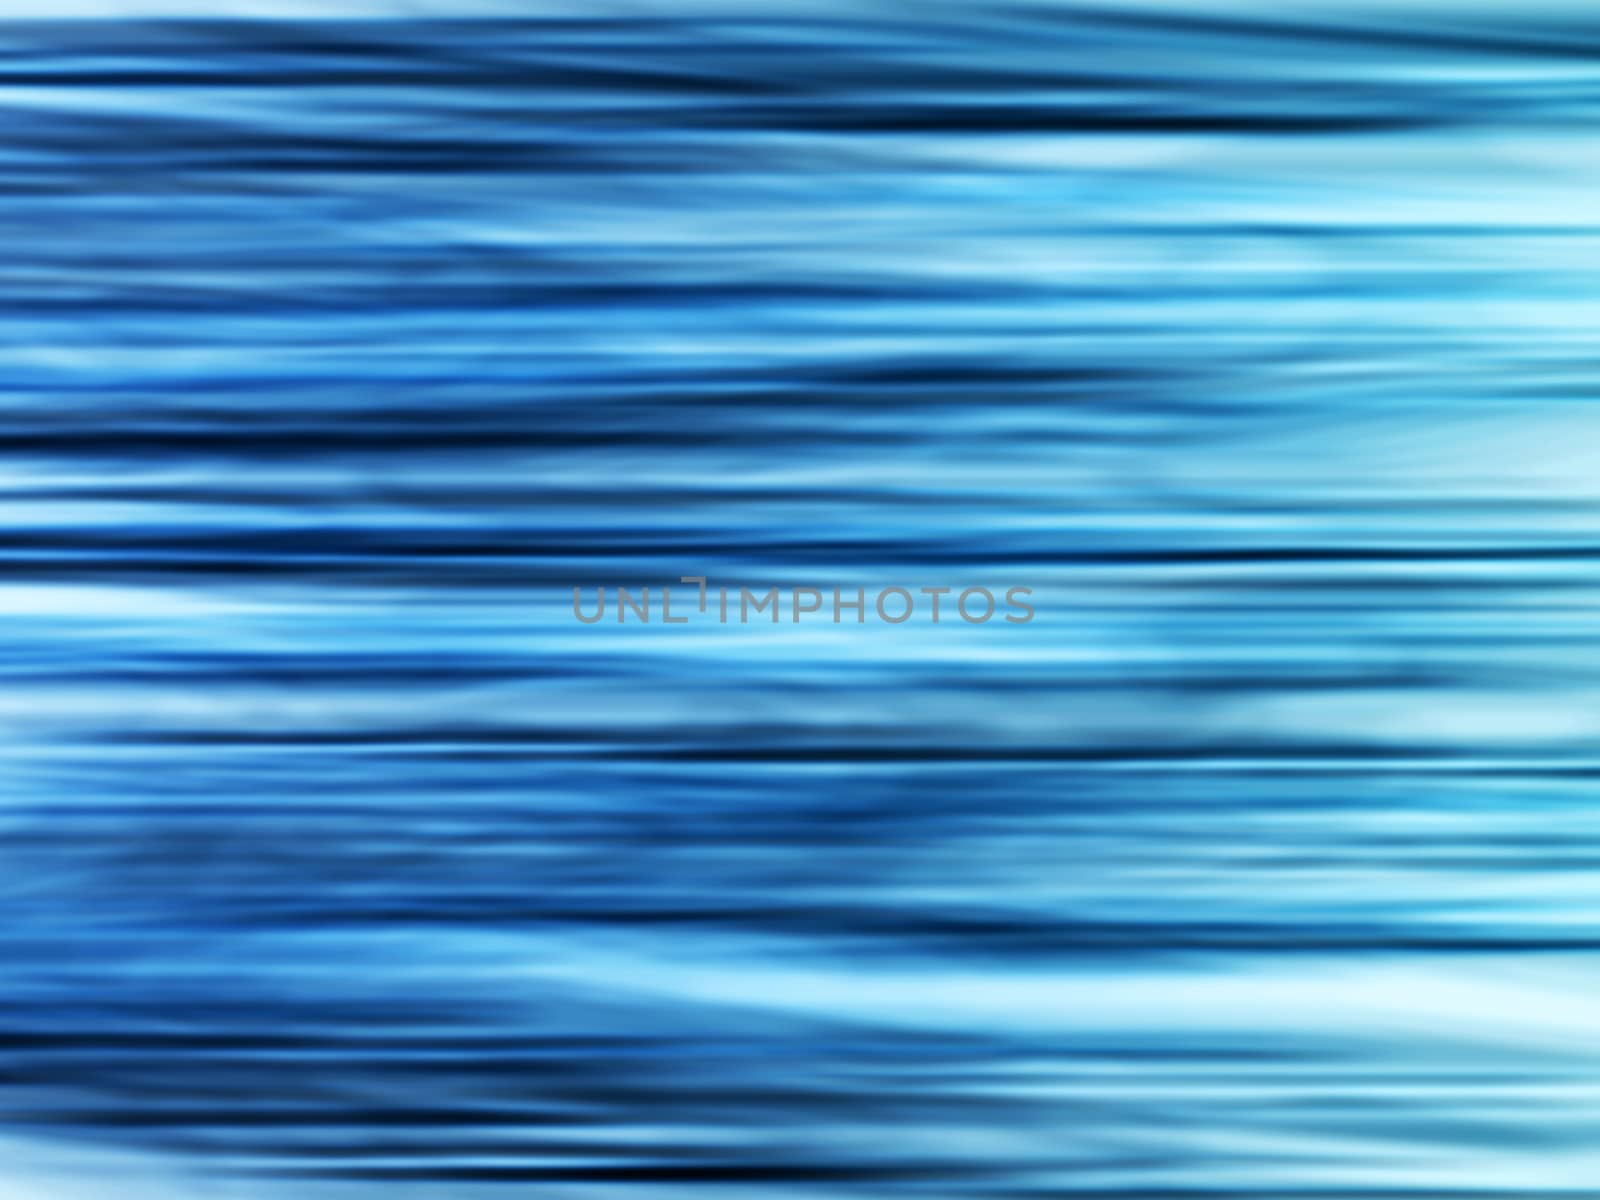 blue and white striped background